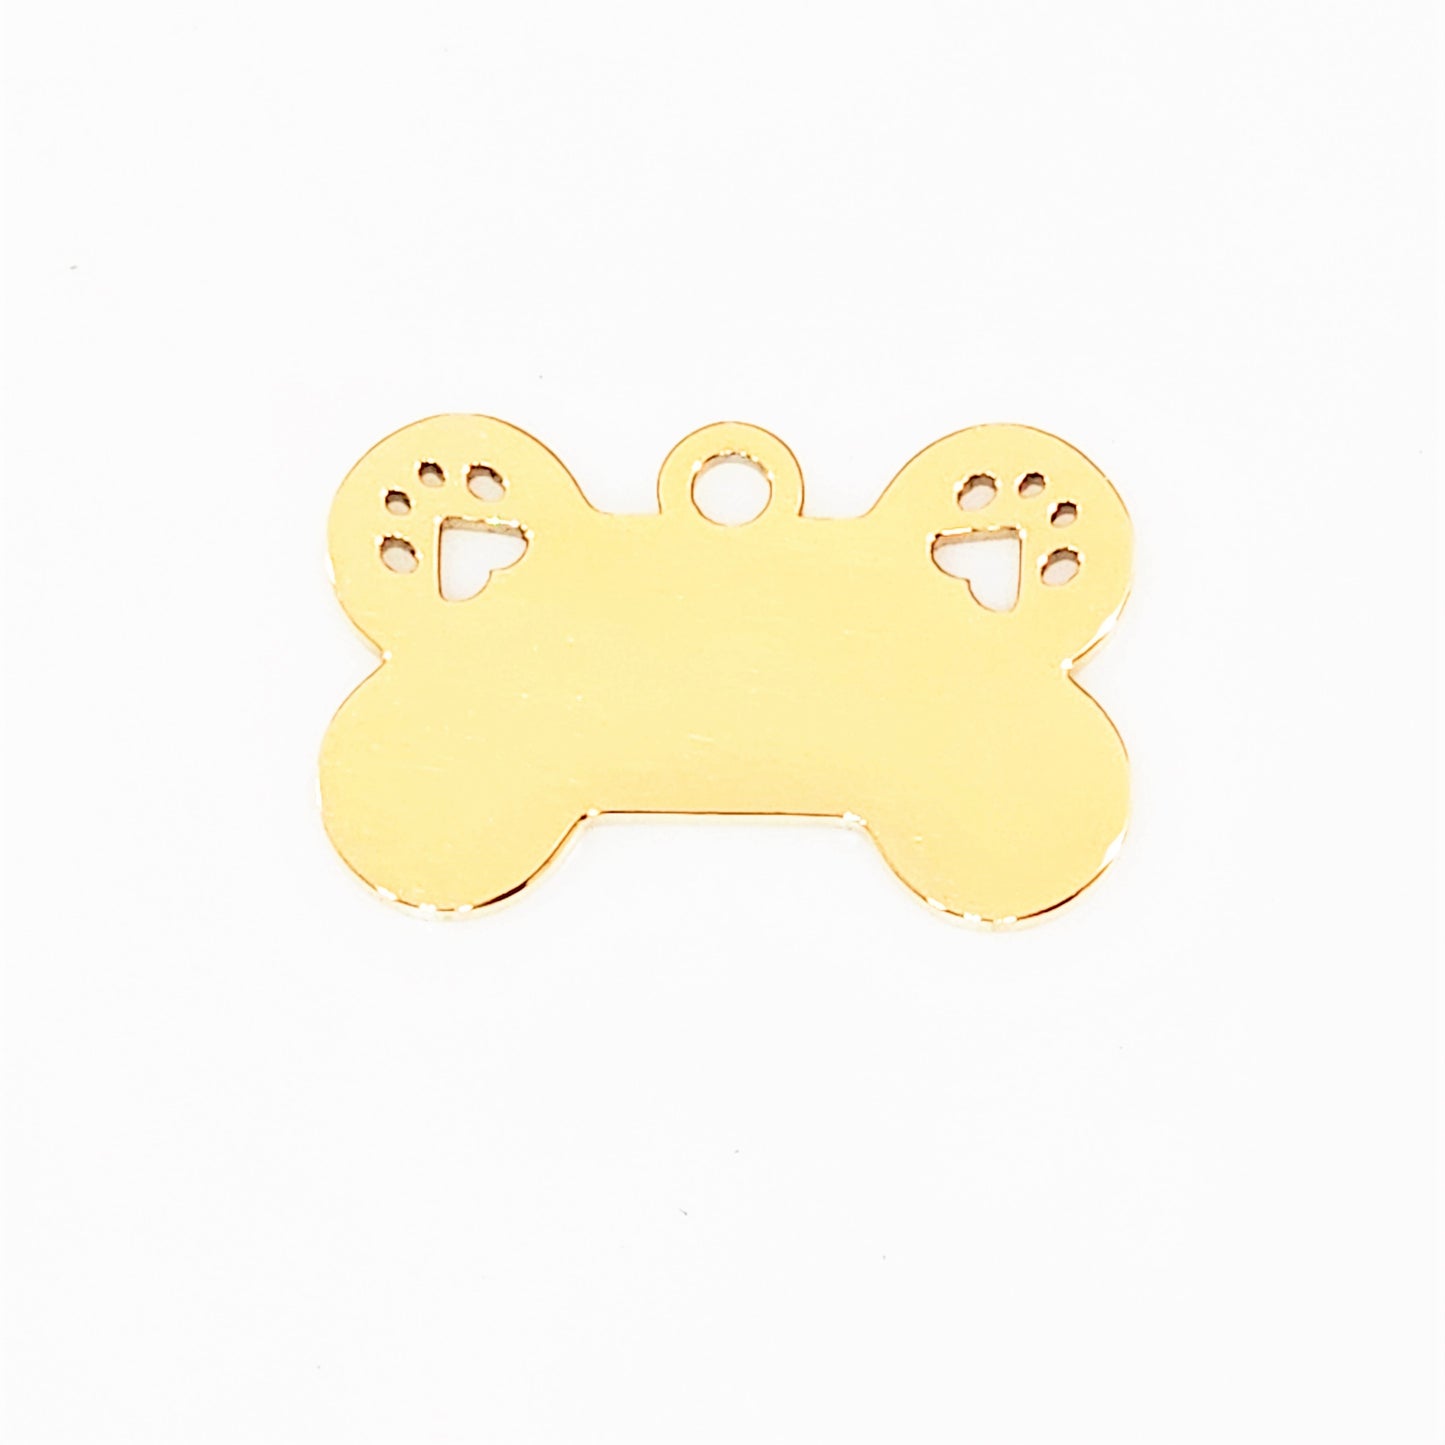 Gold Plated Dog Bone with Two Paws - 16mm x 25mm